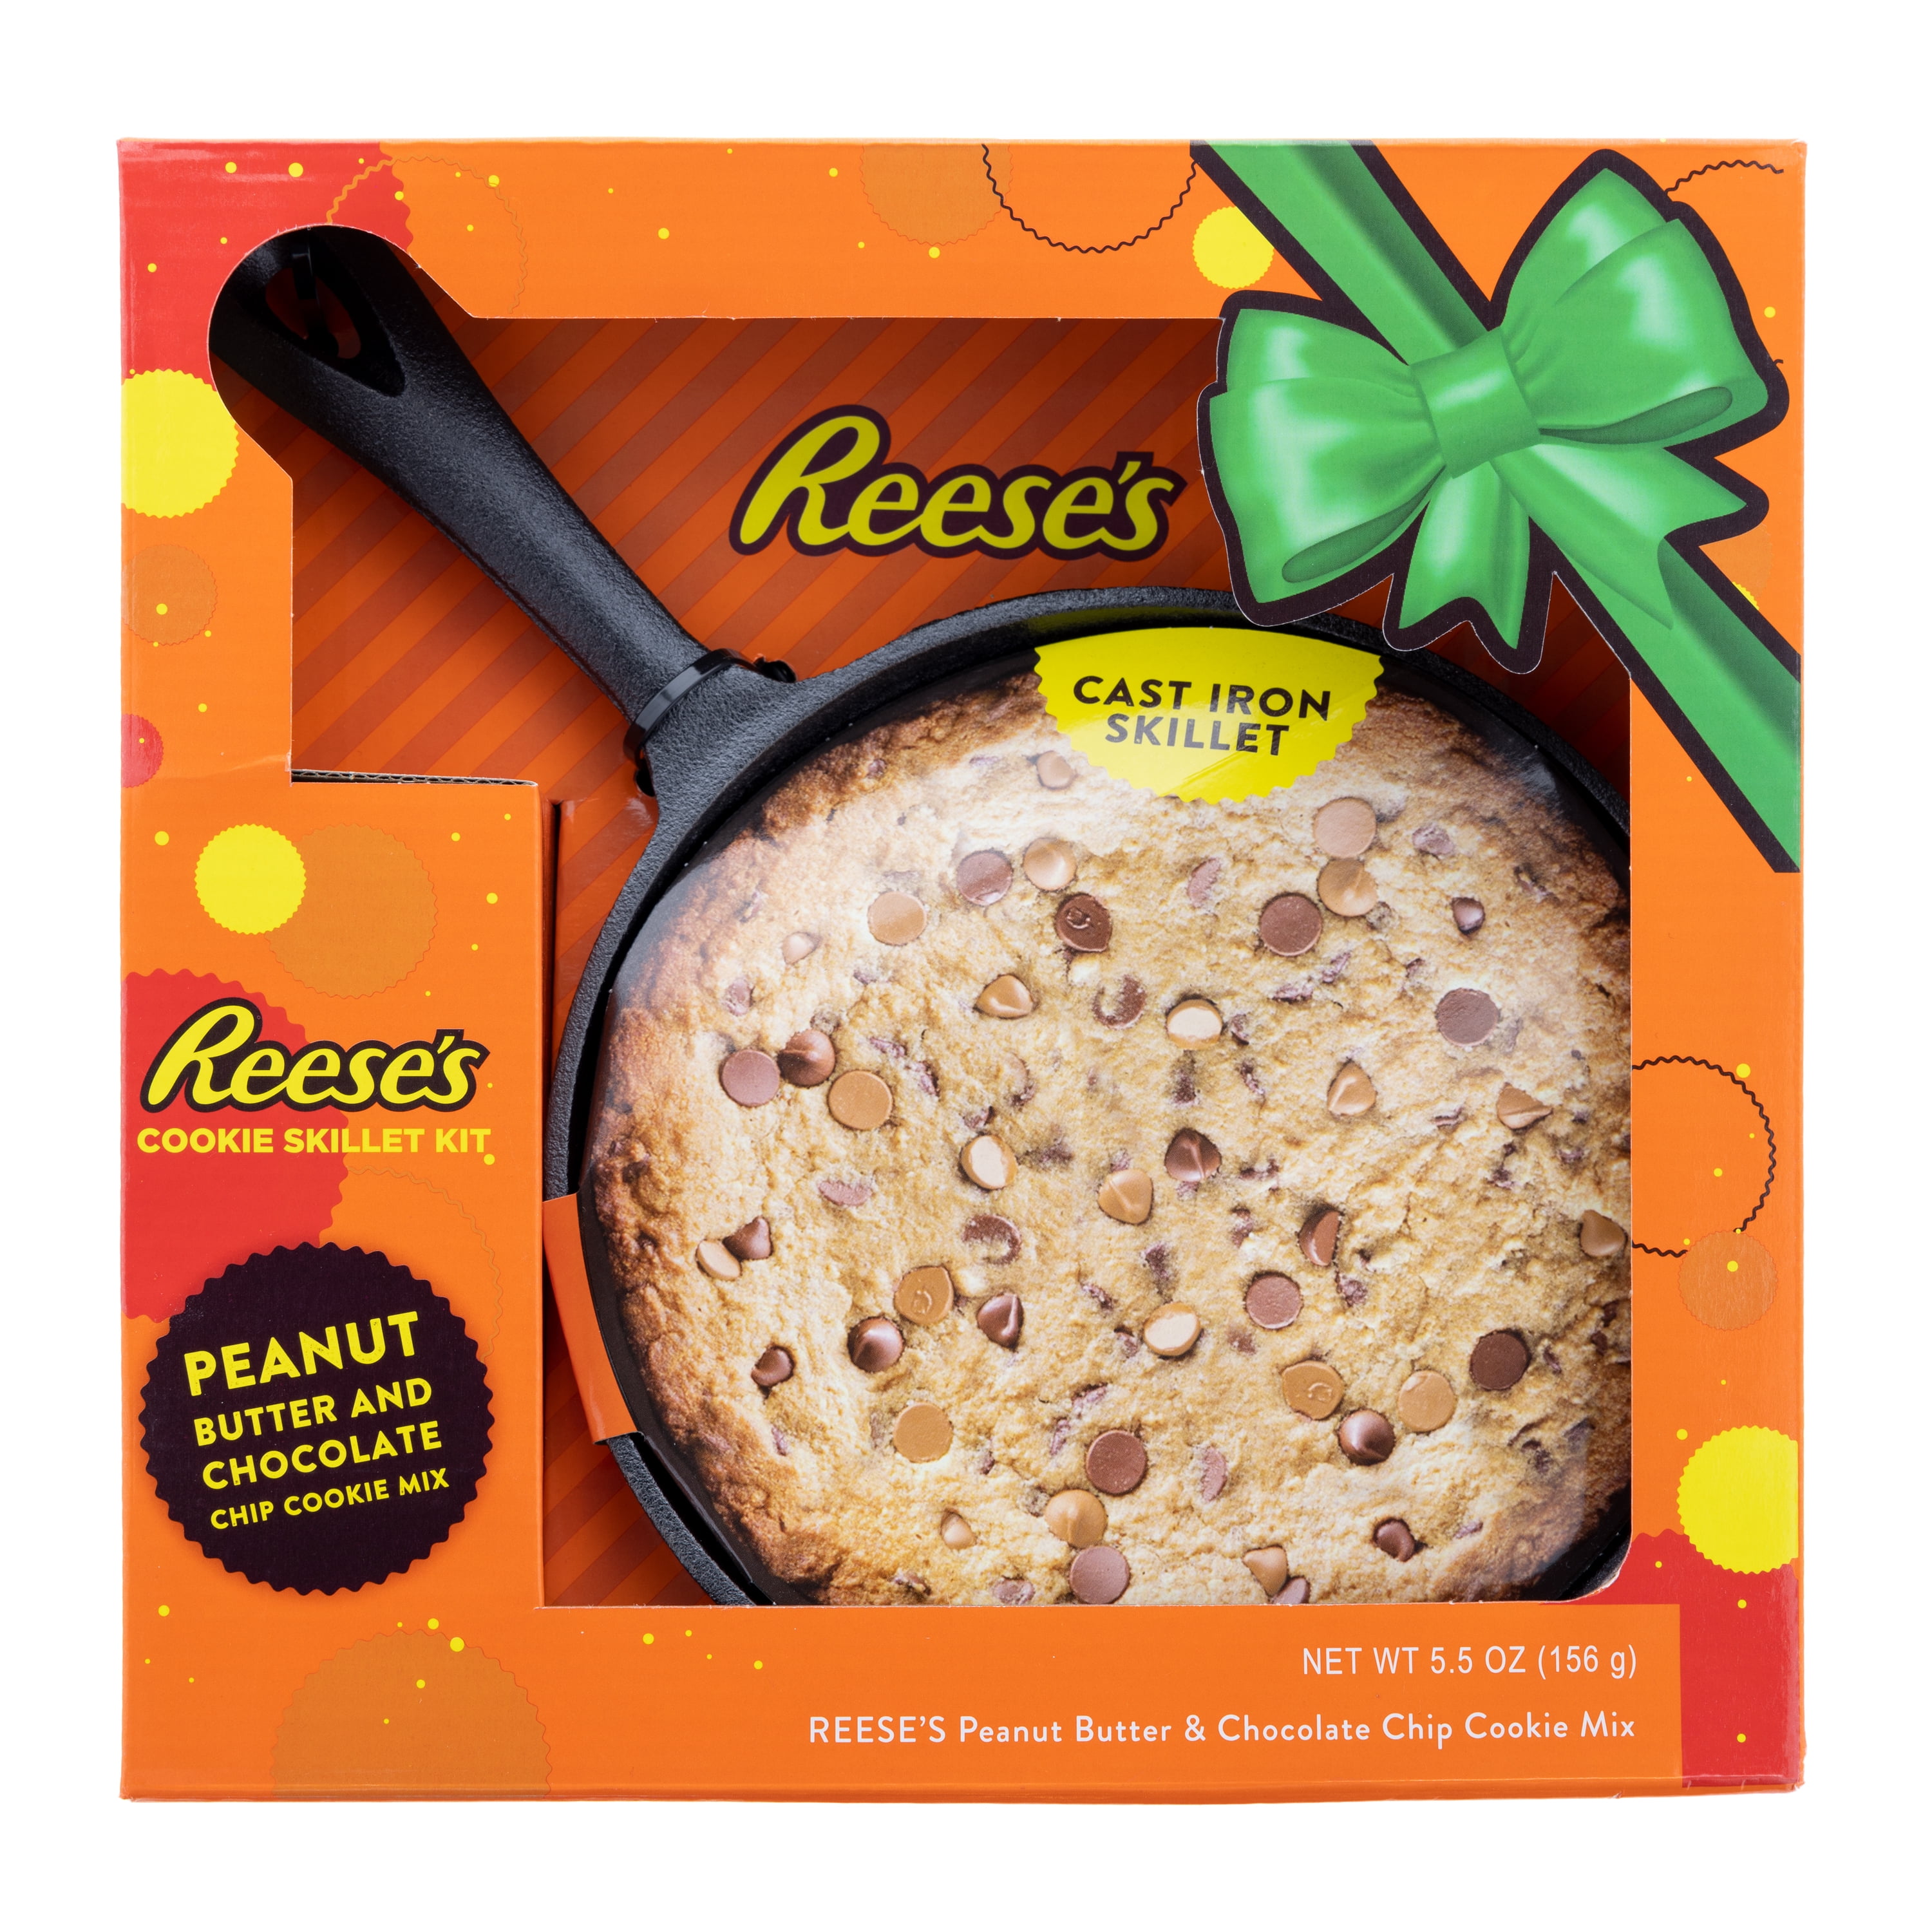 Hershey's Reese's Giant Party Skillet with Chocolate, 5.5 oz